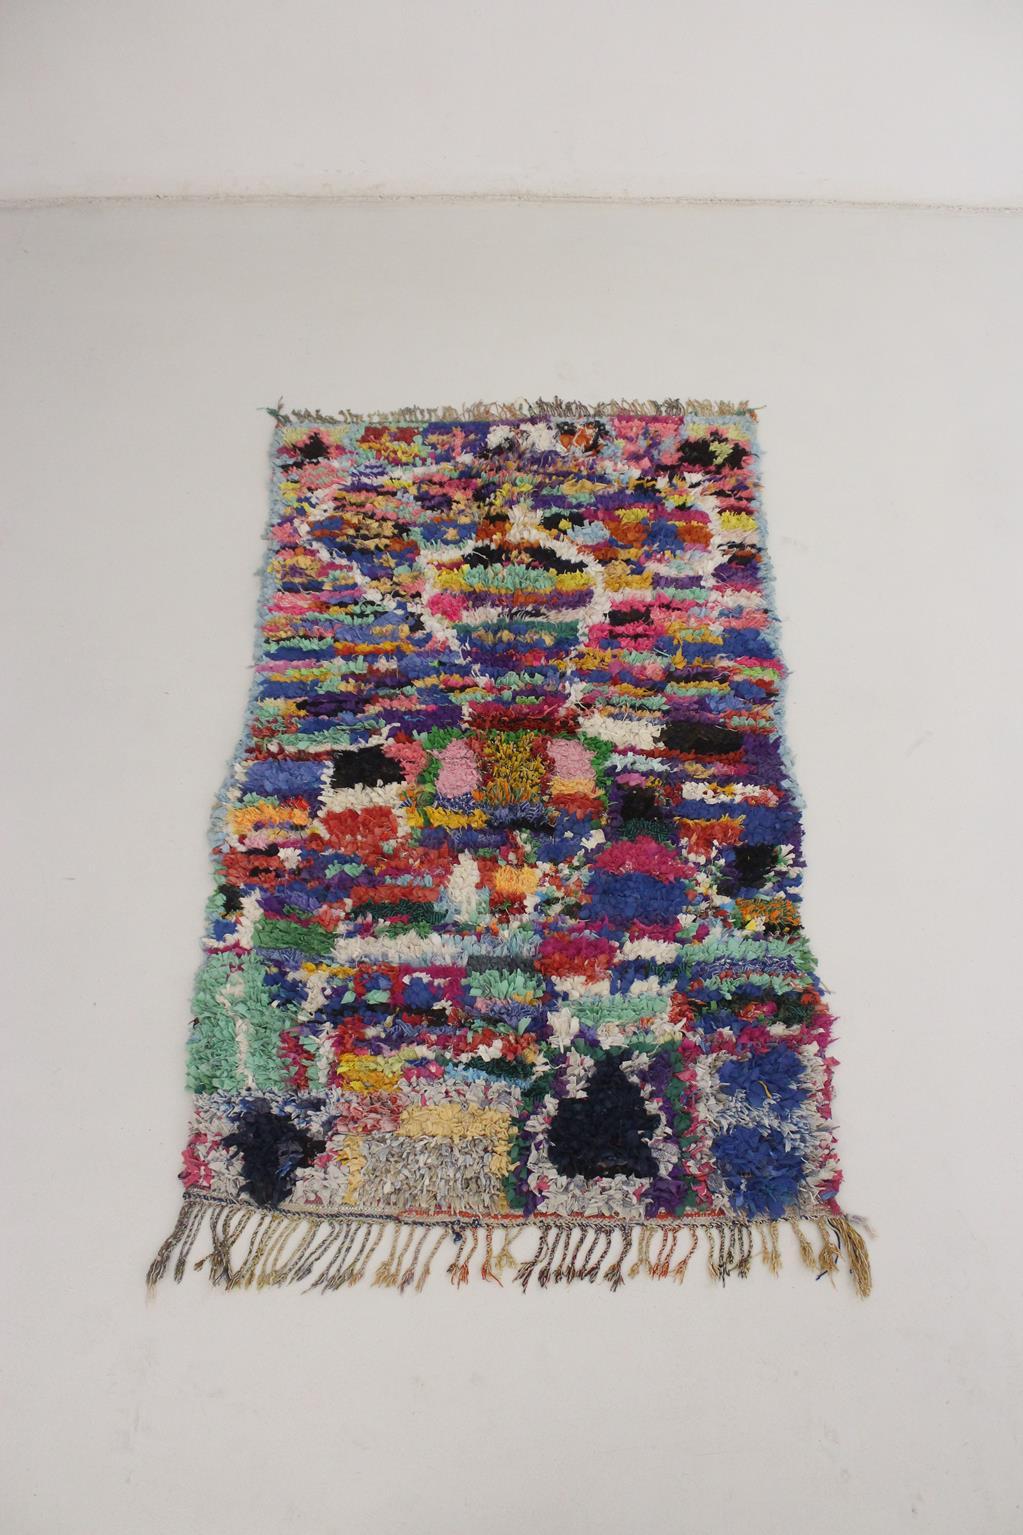 This vintage Boucherouite rug is made of multiple, colorful recycled pieces of clothes knotted on a cotton base. Women in Morocco have been using this technique for generations to recycle the family clothes cutting them in tiny, colorful pieces of